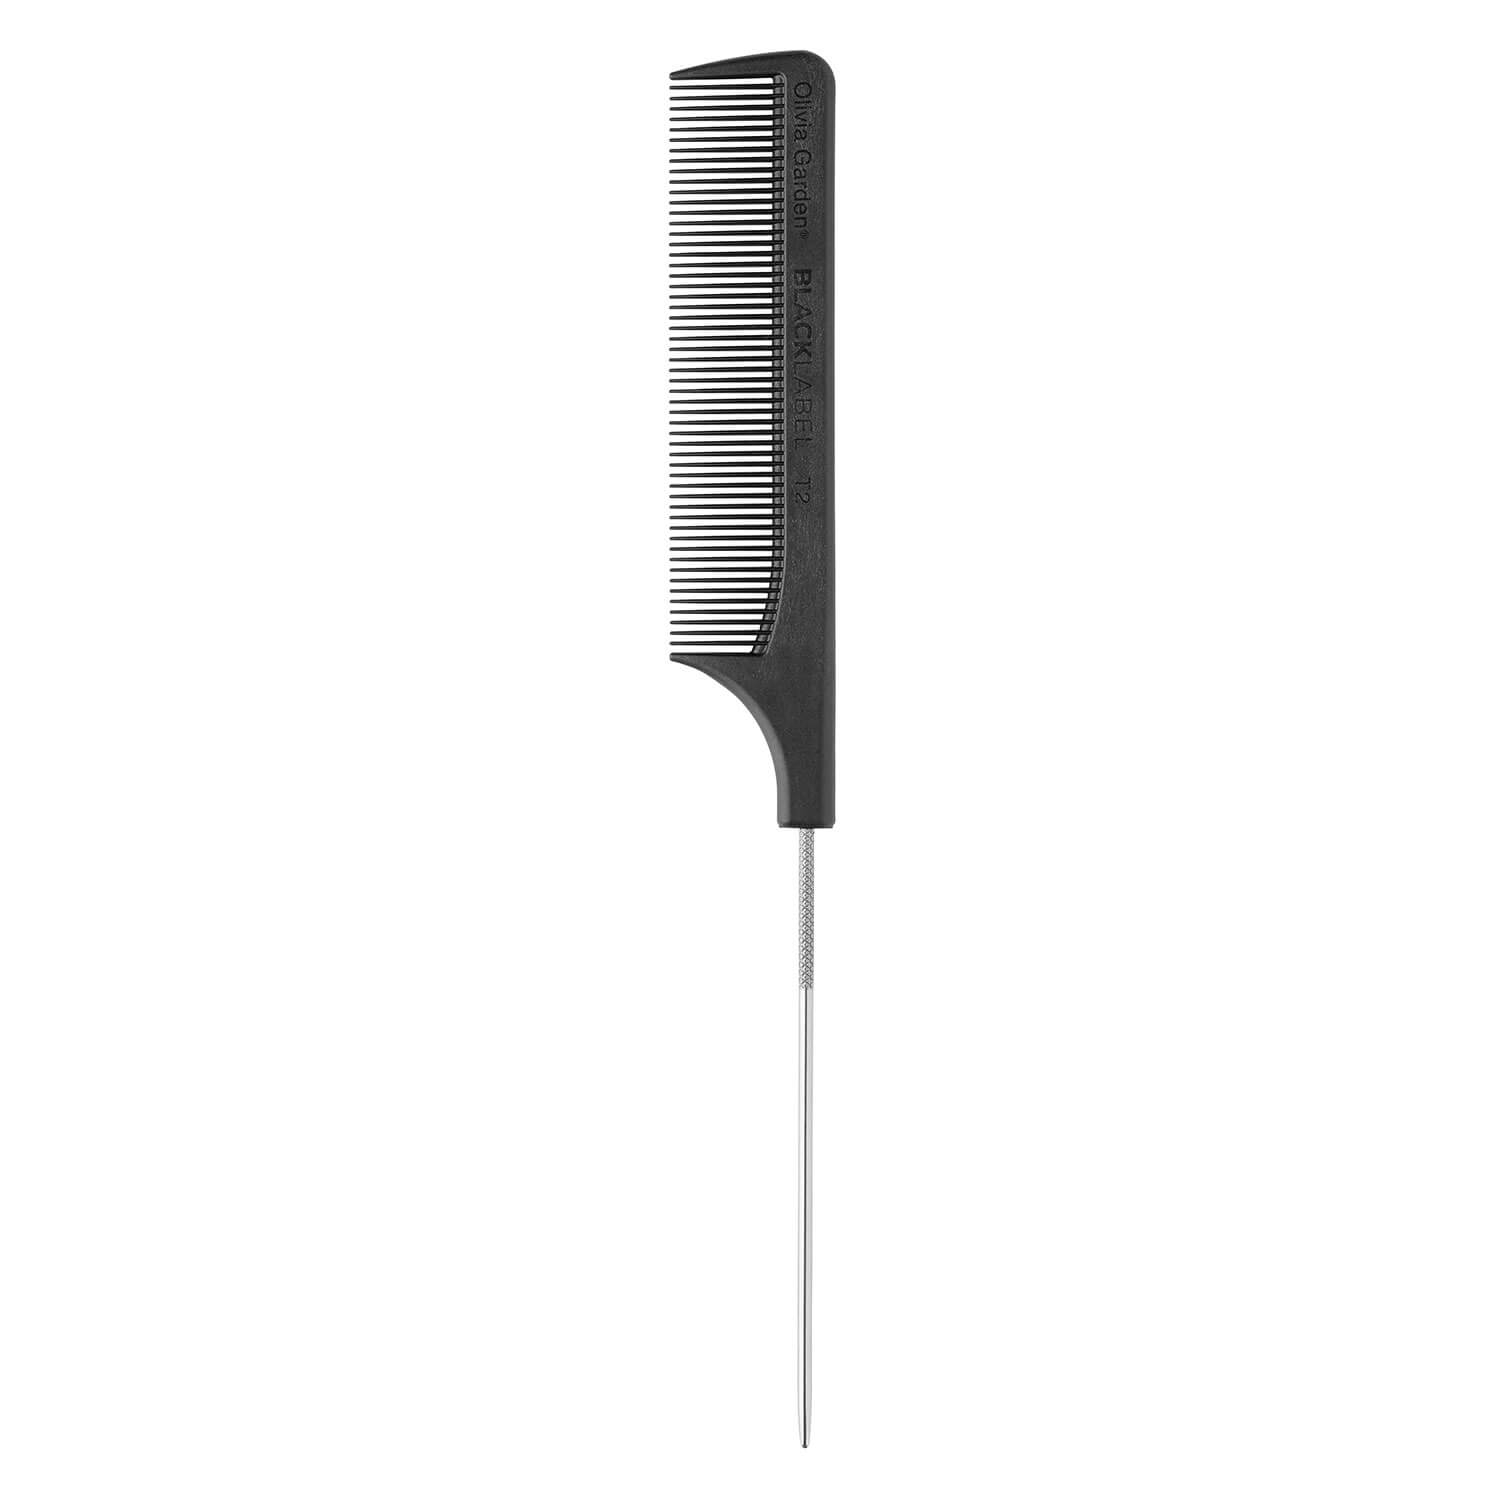 Product image from Olivia Garden - Black Label Comb T2